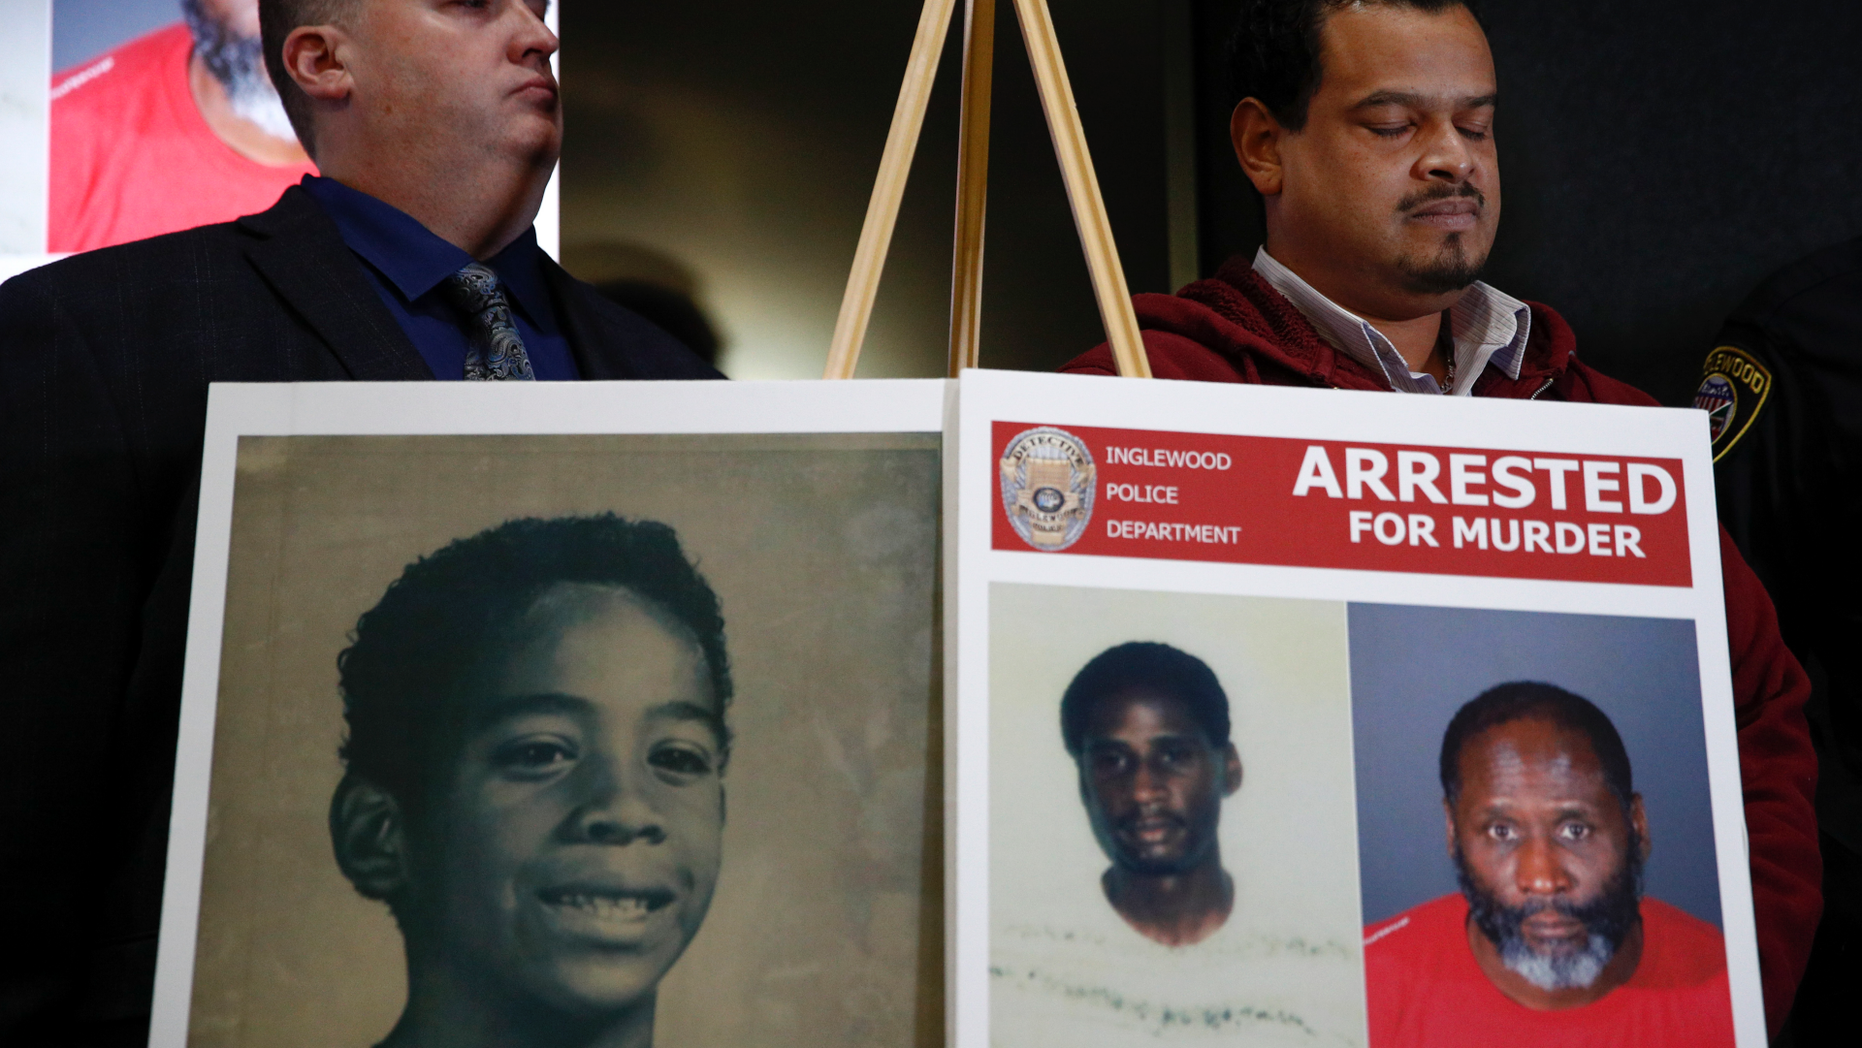 Hubert Tillett, right, brother of William Tillett, stands behind an exhibit showing his brother, at the bottom left, at a press conference on Wednesday, February 20, 2019 in Inglewood, California. Authorities say that a 50-year-old man is being held in connection with the kidnapping and murder of William Tillett, then 11, in southern California, there are nearly three decades. (AP Photo / Jae C. Hong)